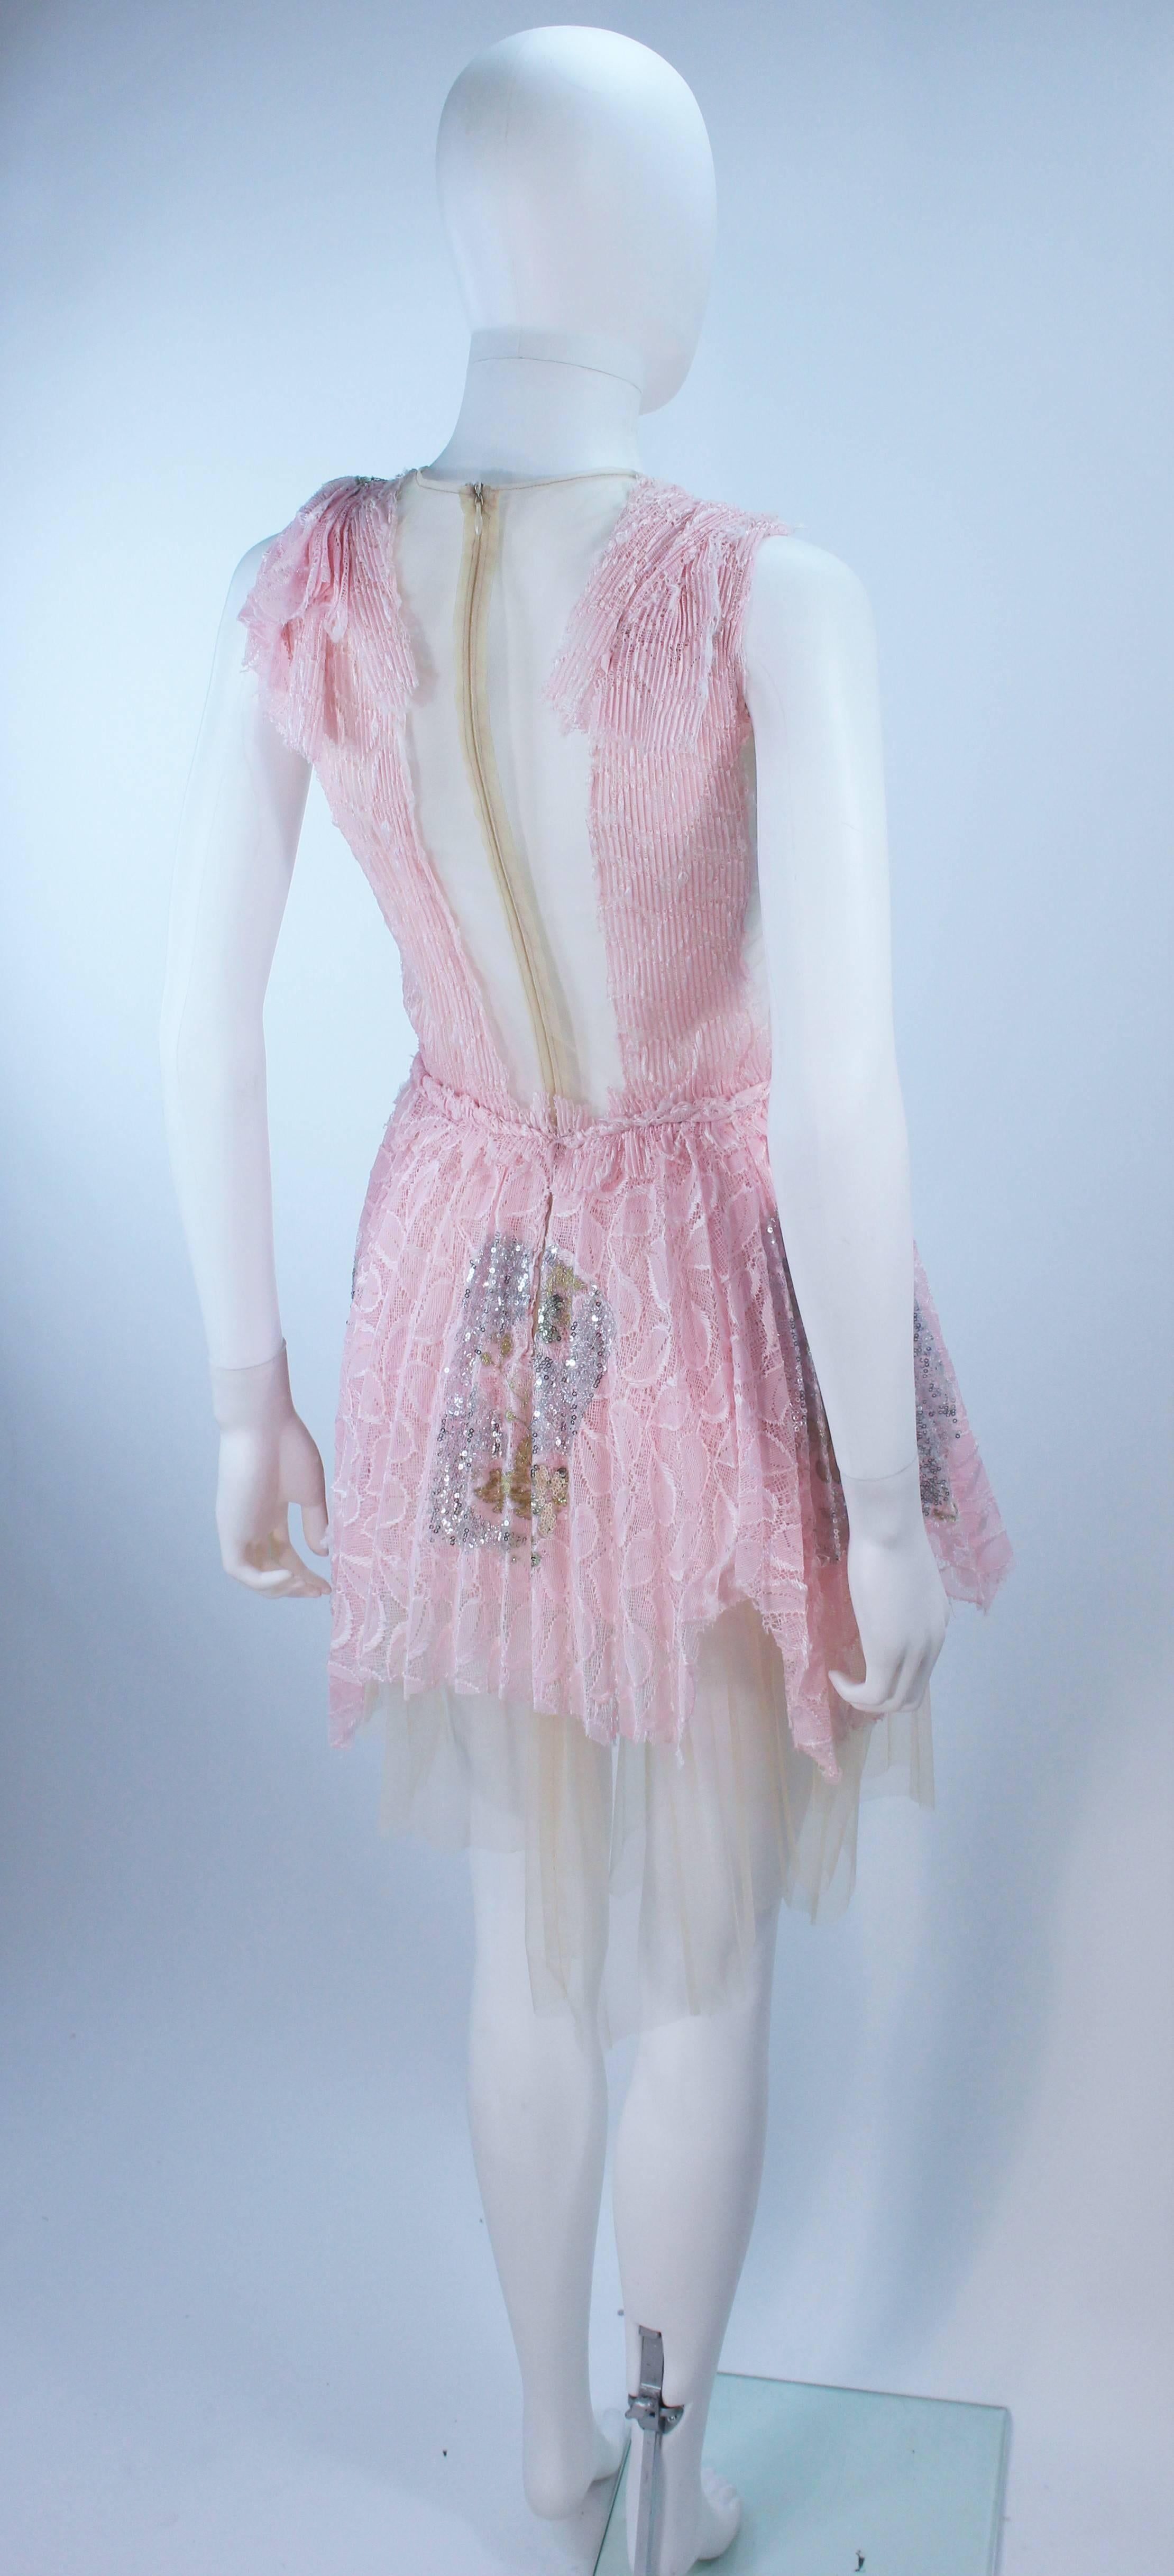 MORALES Sheer Pink Applique Cocktail Dress with Sequins Size 2 For Sale 3